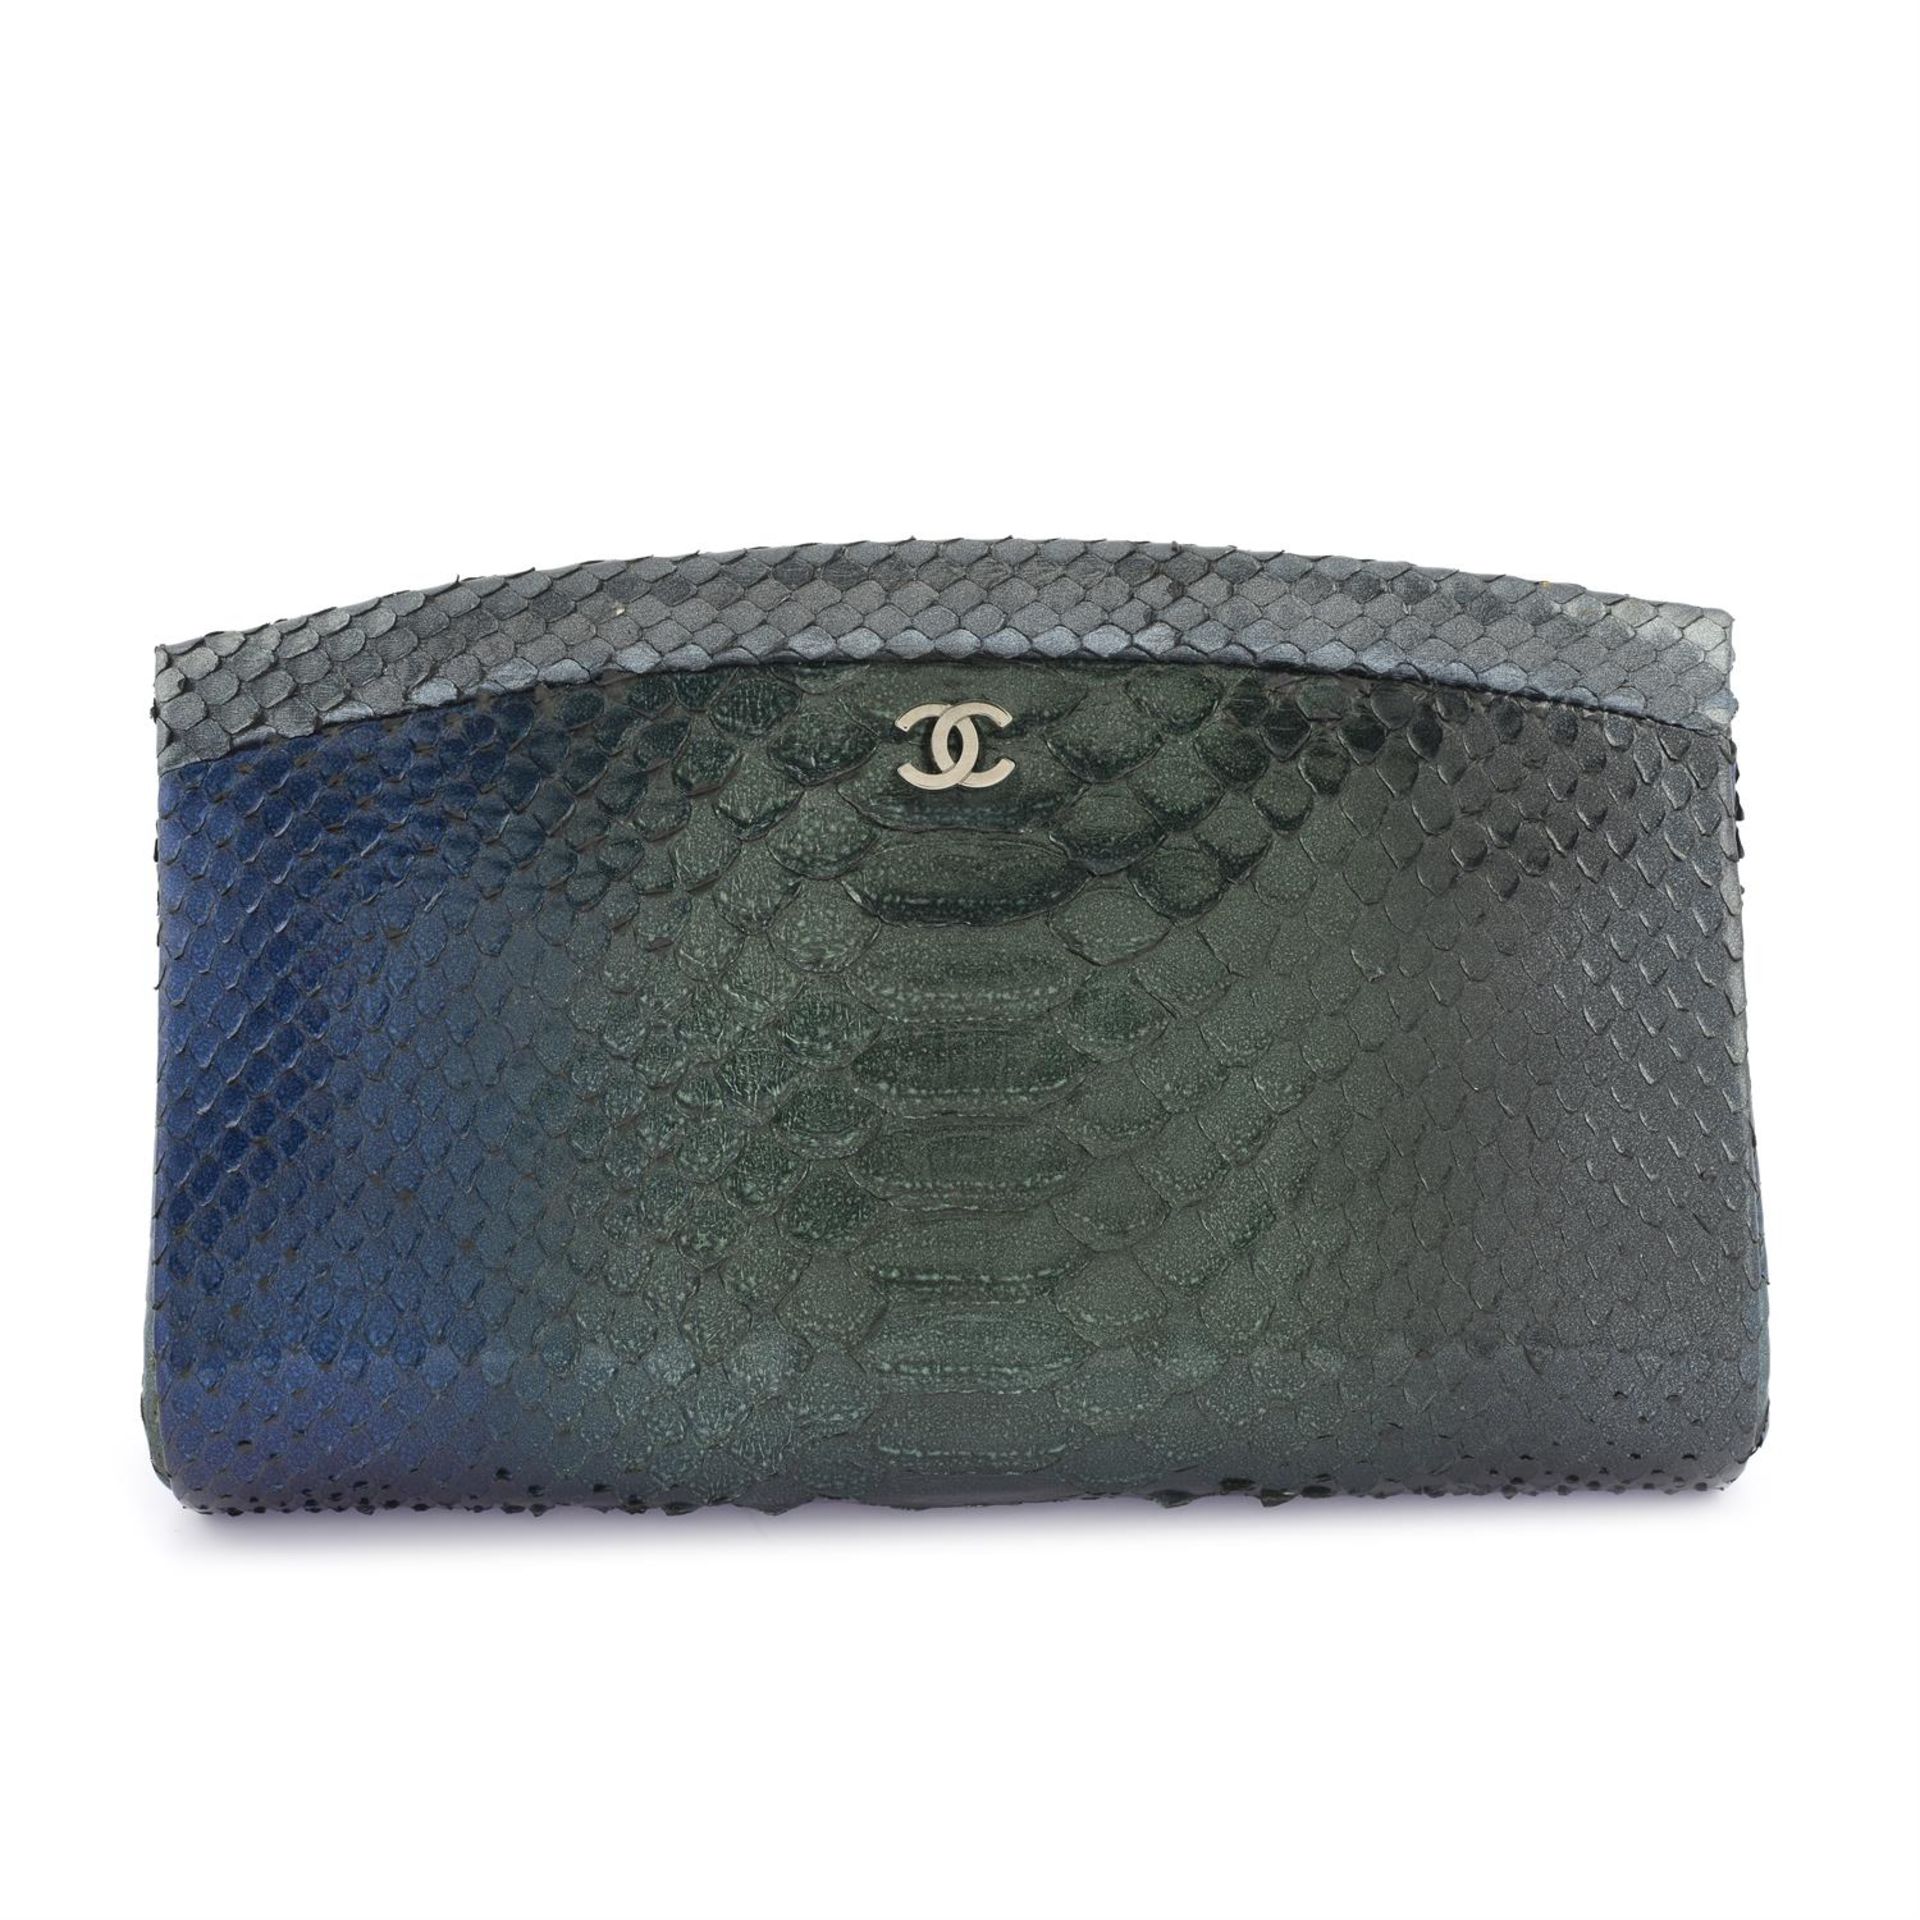 CHANEL - a green and blue gradient Python clutch.